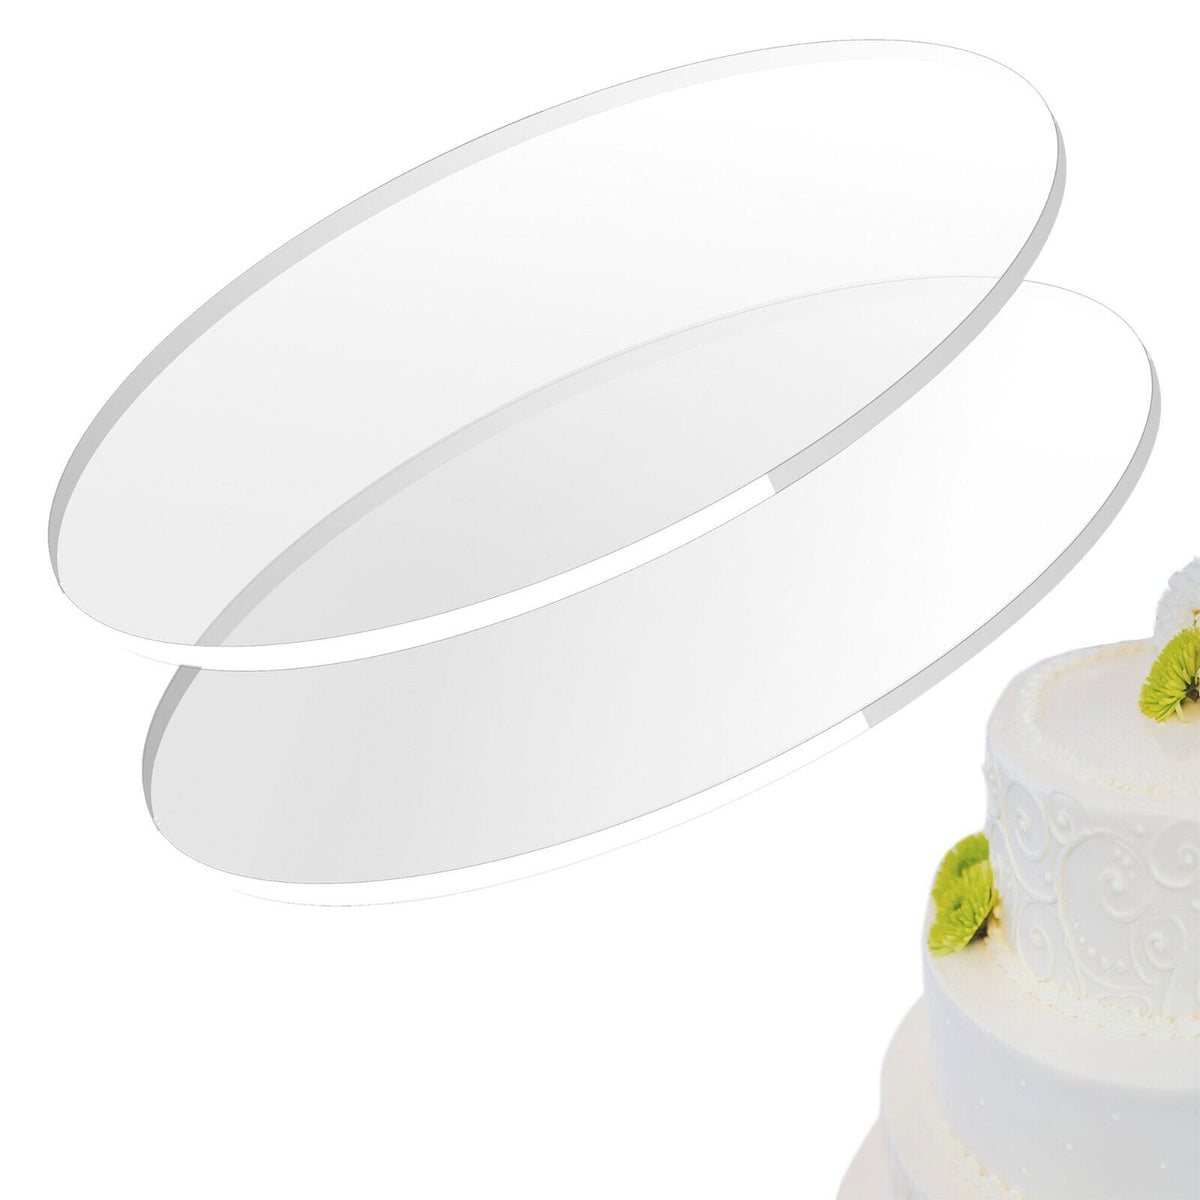 Acrylic Cake Discs - Set of 2 Circles (0.22 inch thick)